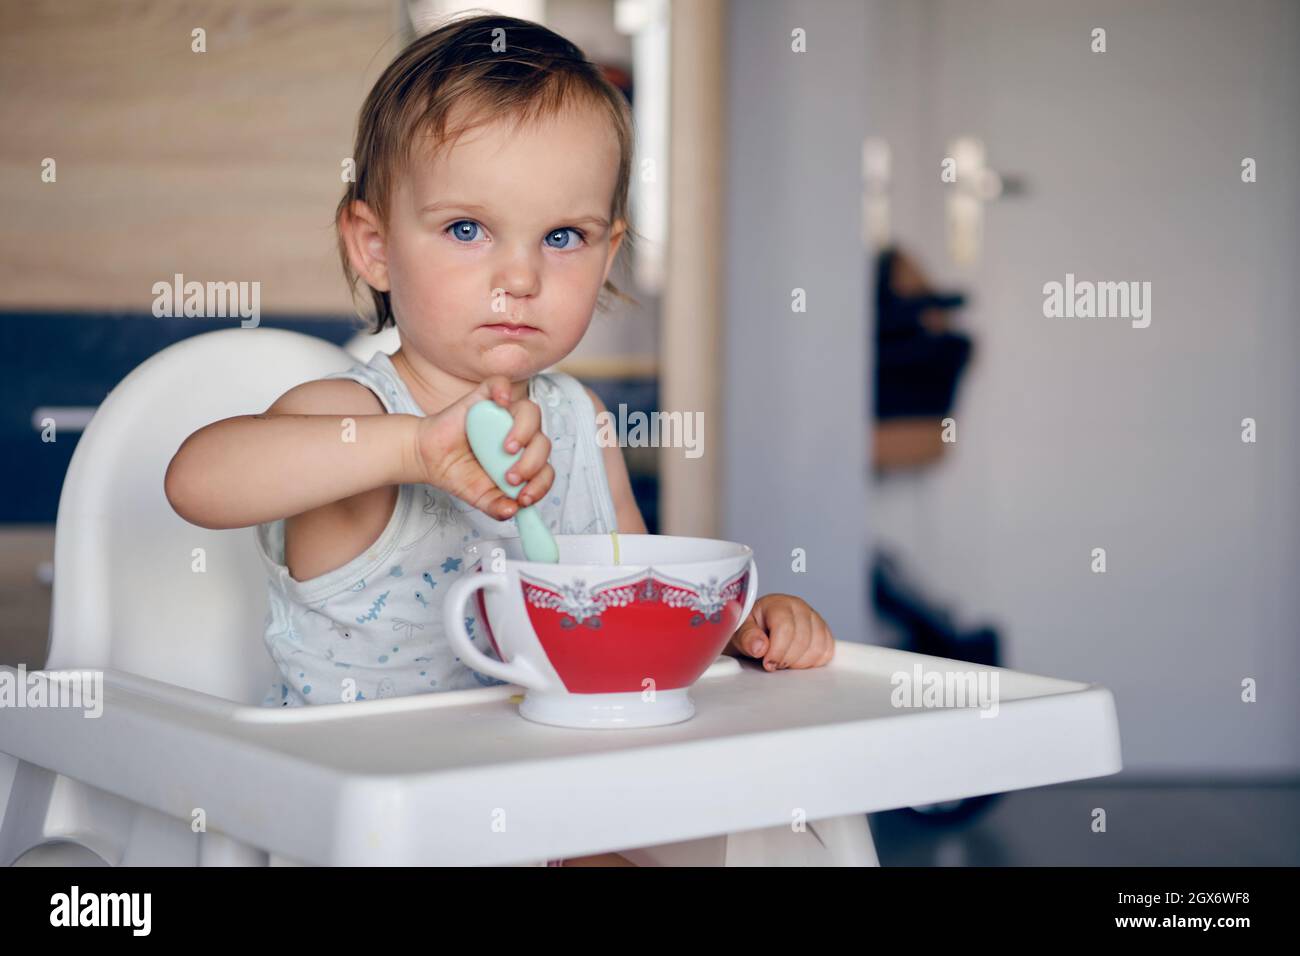 half-length view of a adorable blue-eyed little girl eats soup from the bowl and looks at the camera Stock Photo